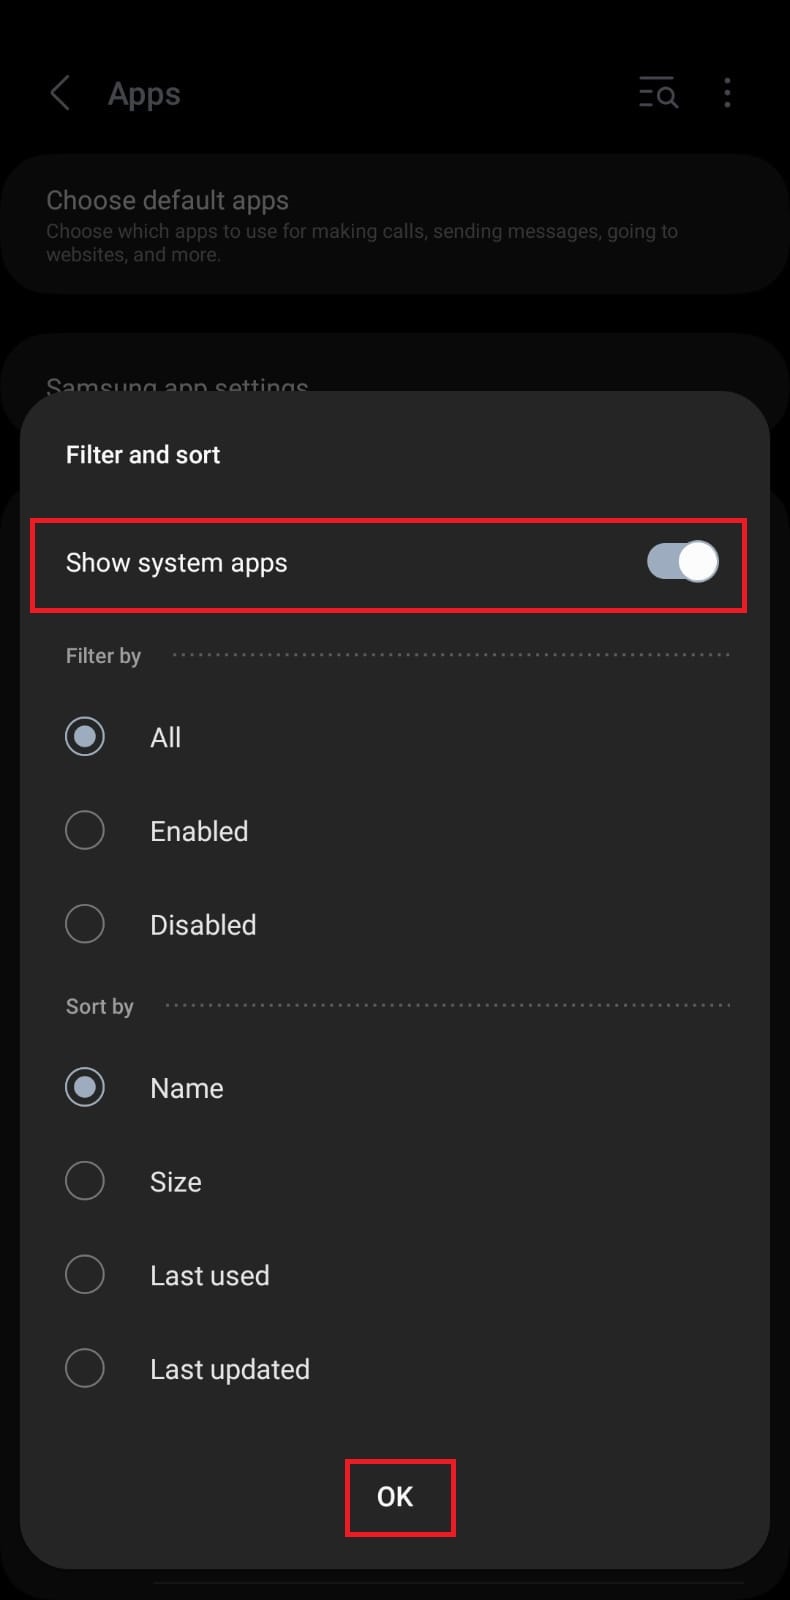 Enable the toggle for Show system apps and tap on OK.